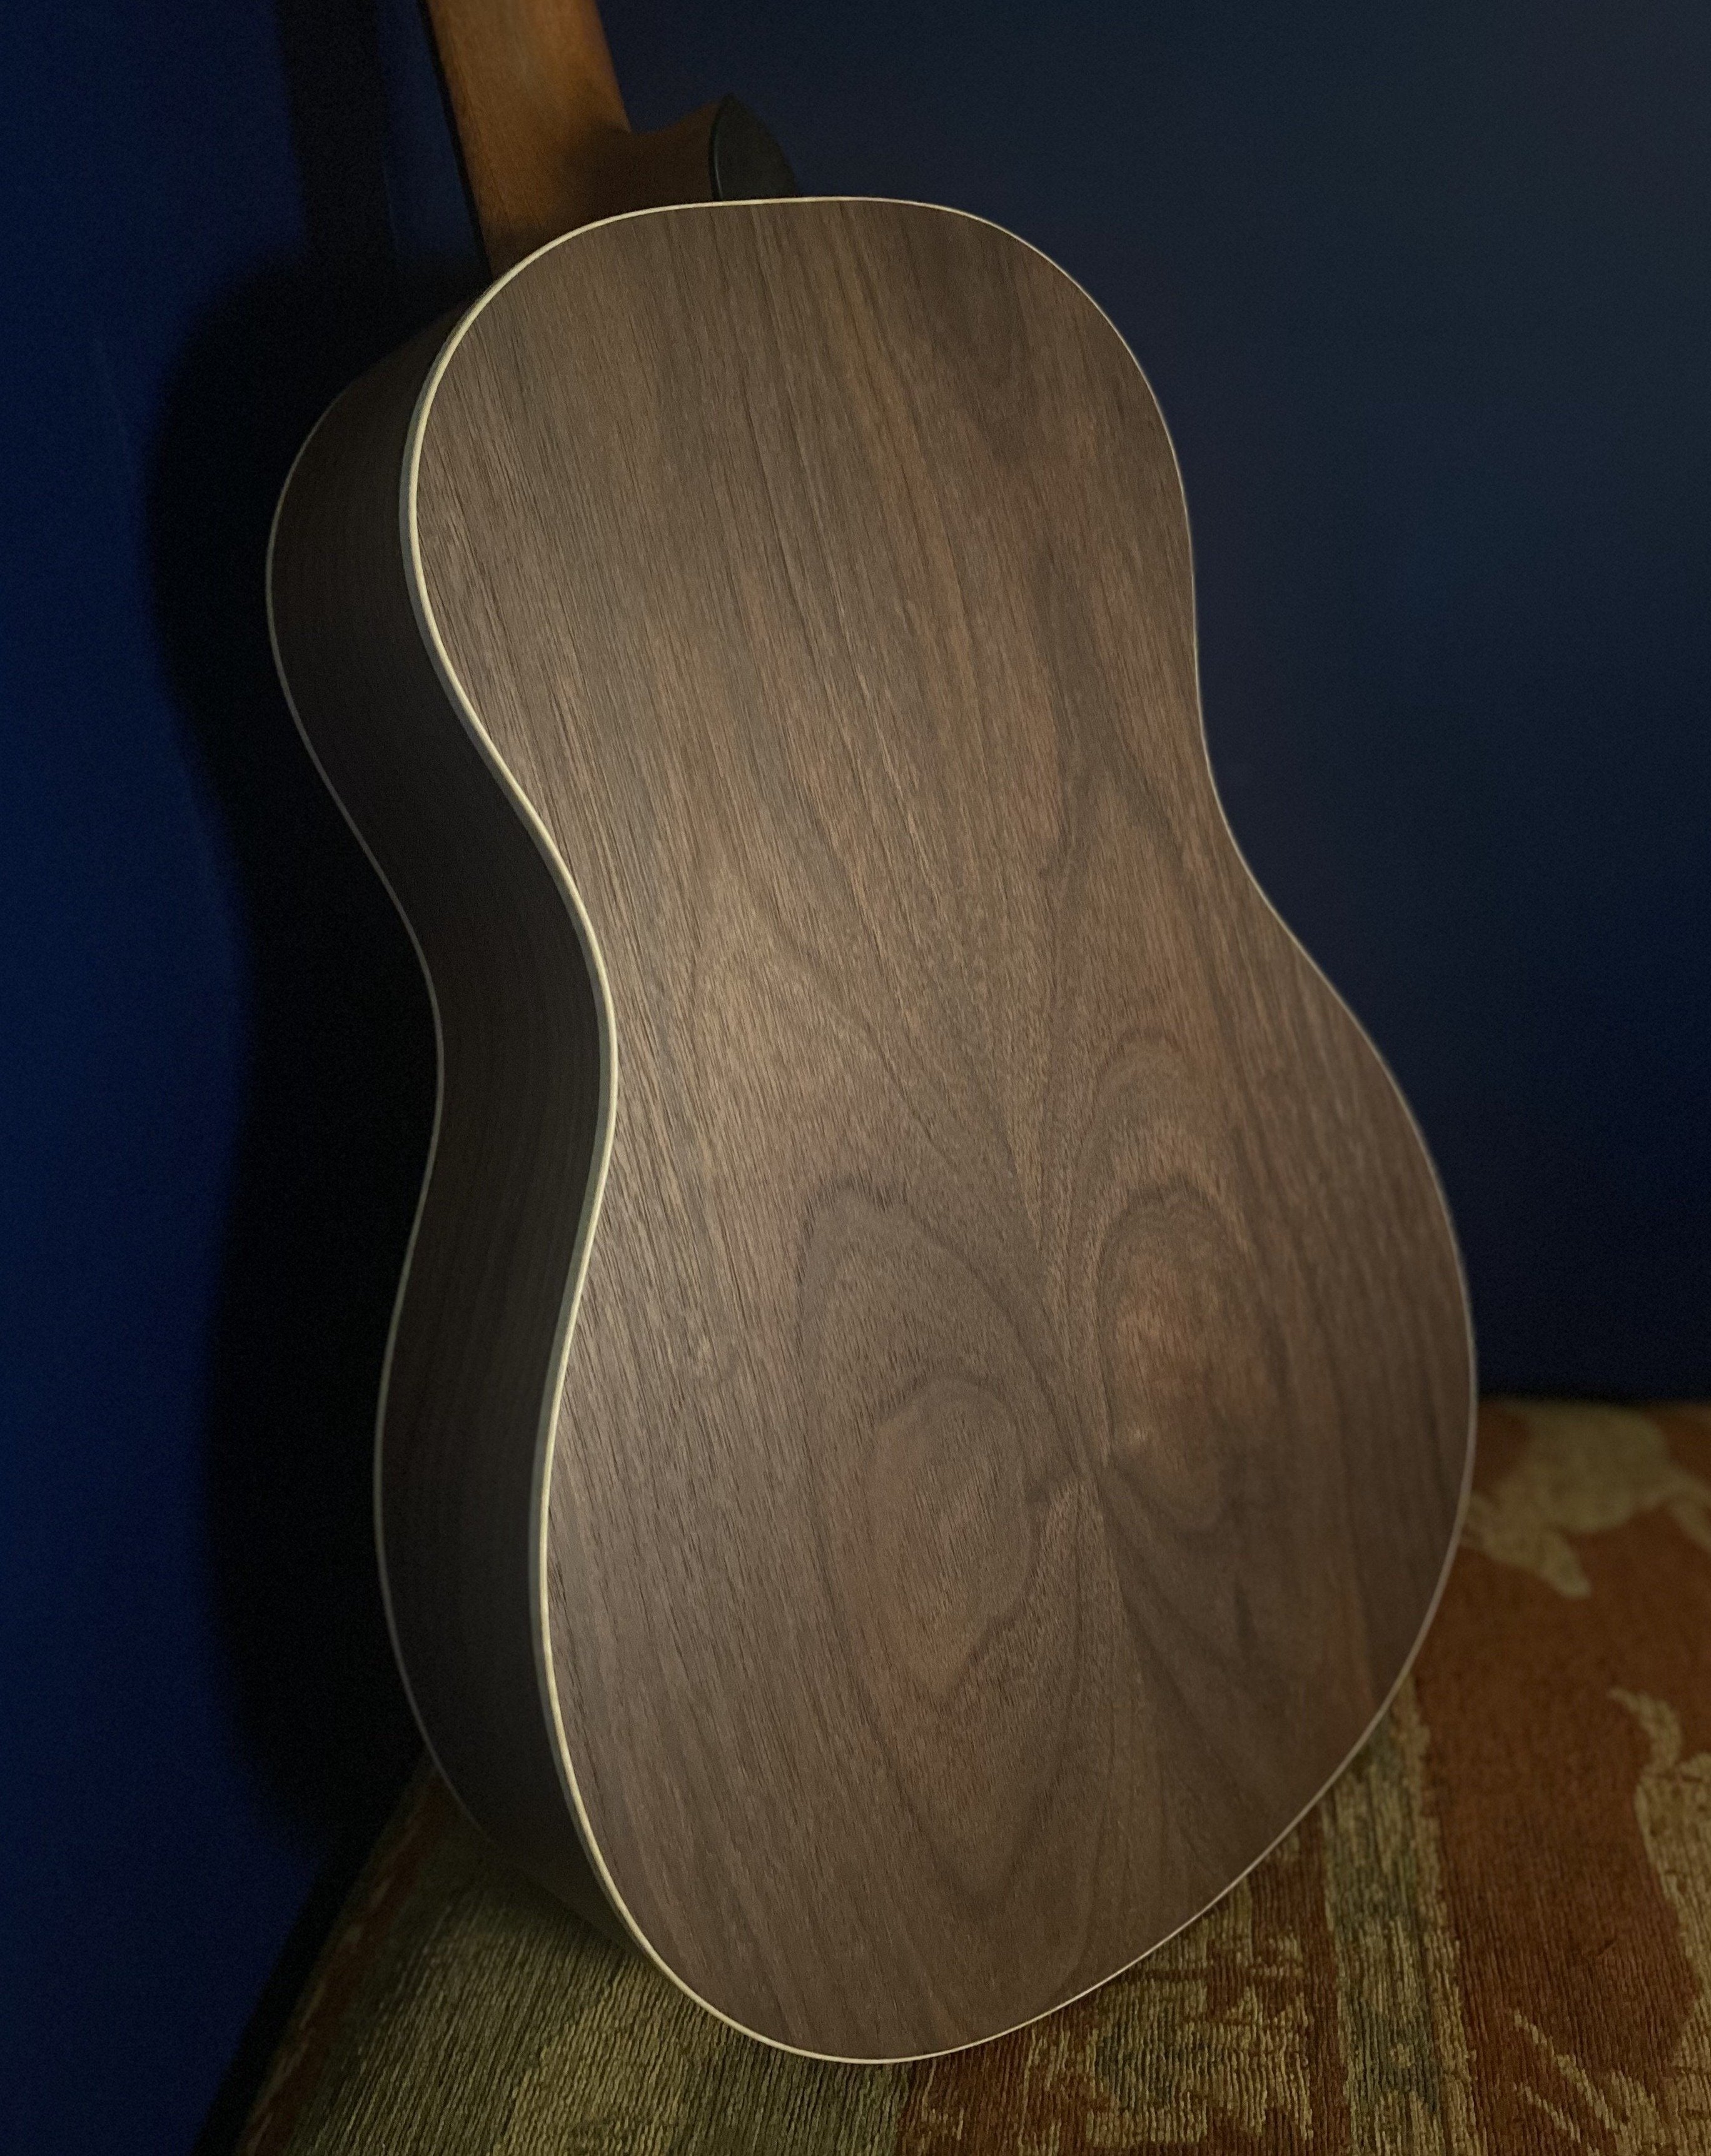 Dowina Walnut Tribute BV, Acoustic Guitar for sale at Richards Guitars.